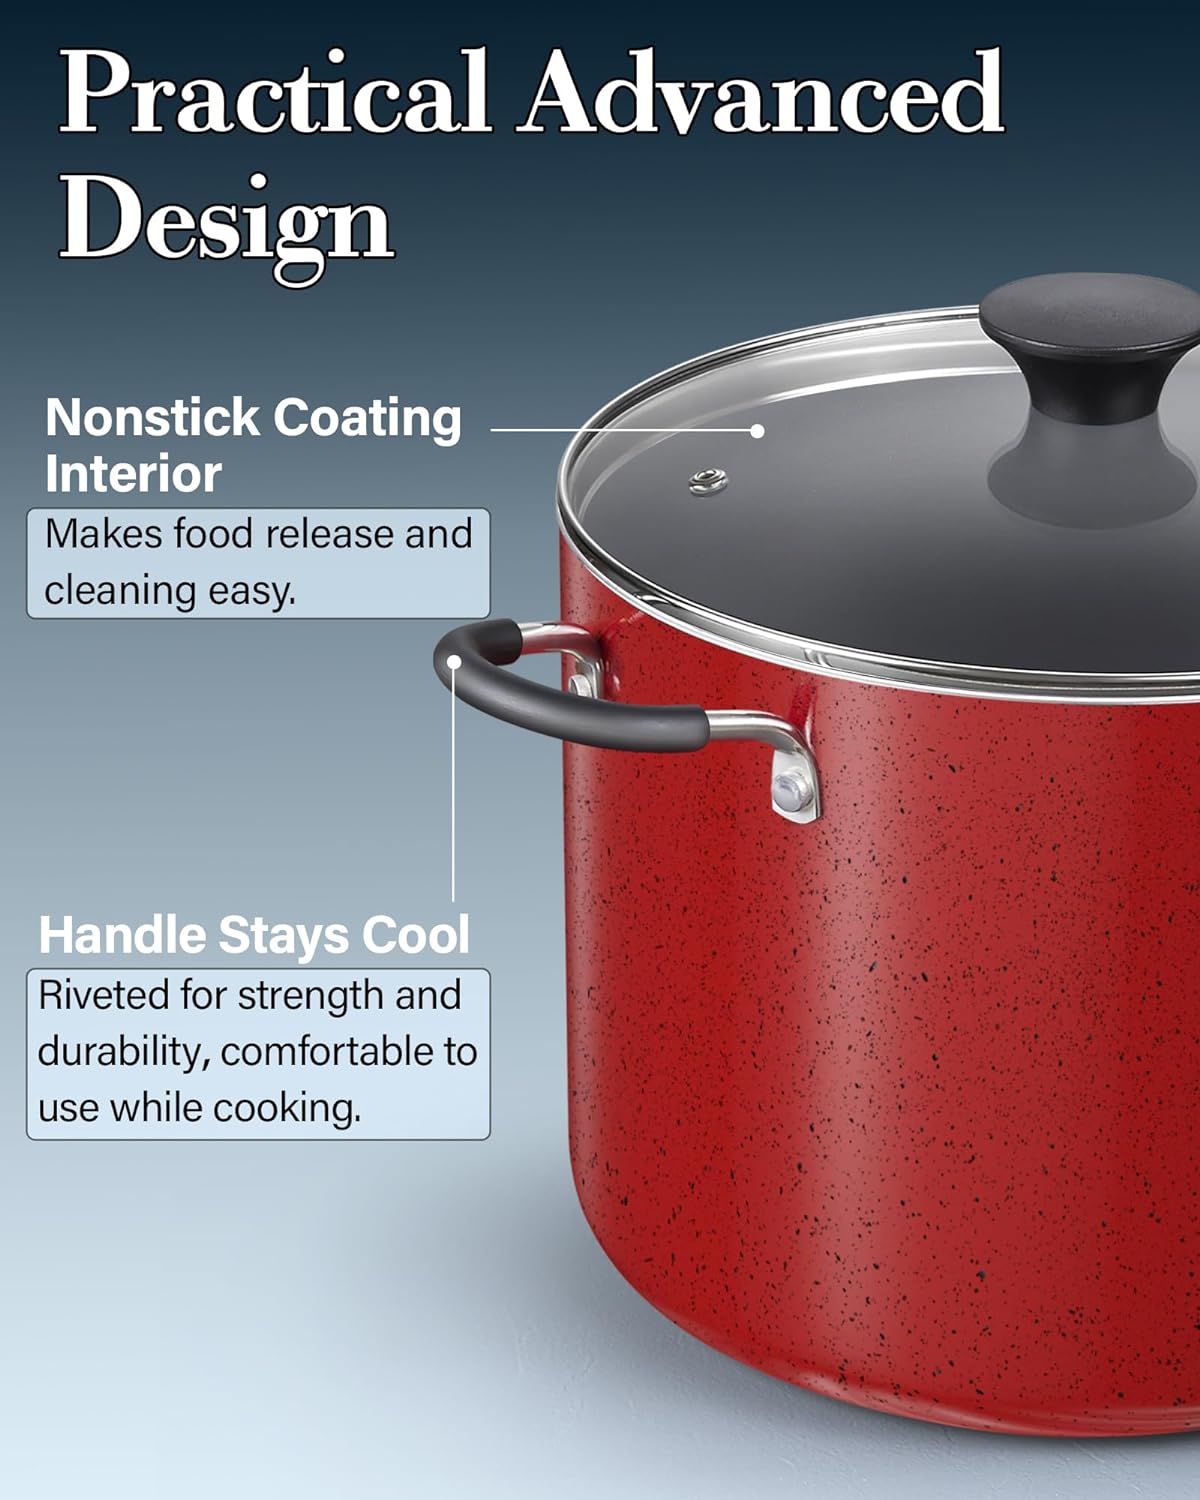 5 QT Non-stick Stockpot with Glass Lid 